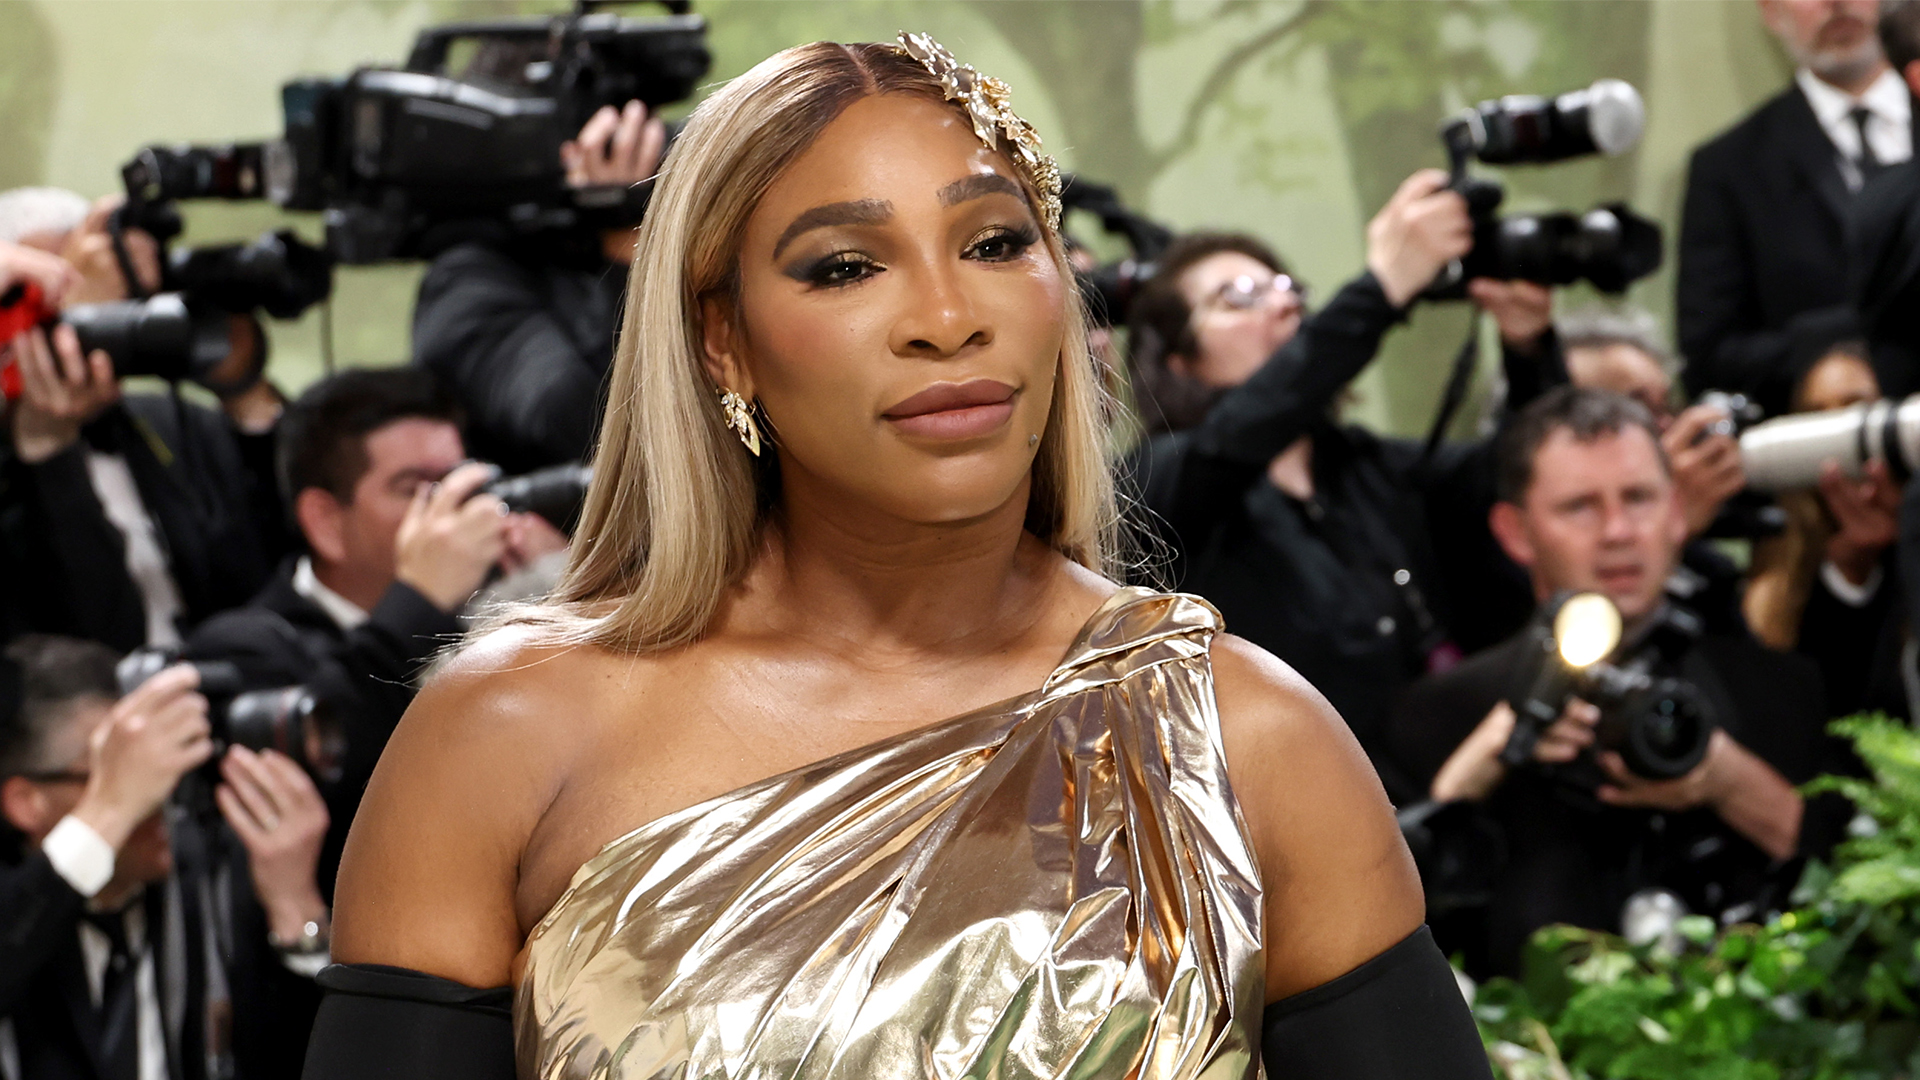 Serena Williams Had $94.8M In Prize Earnings During Her Tennis Career, But At One Point She Would Forget To Pick Up Her Checks